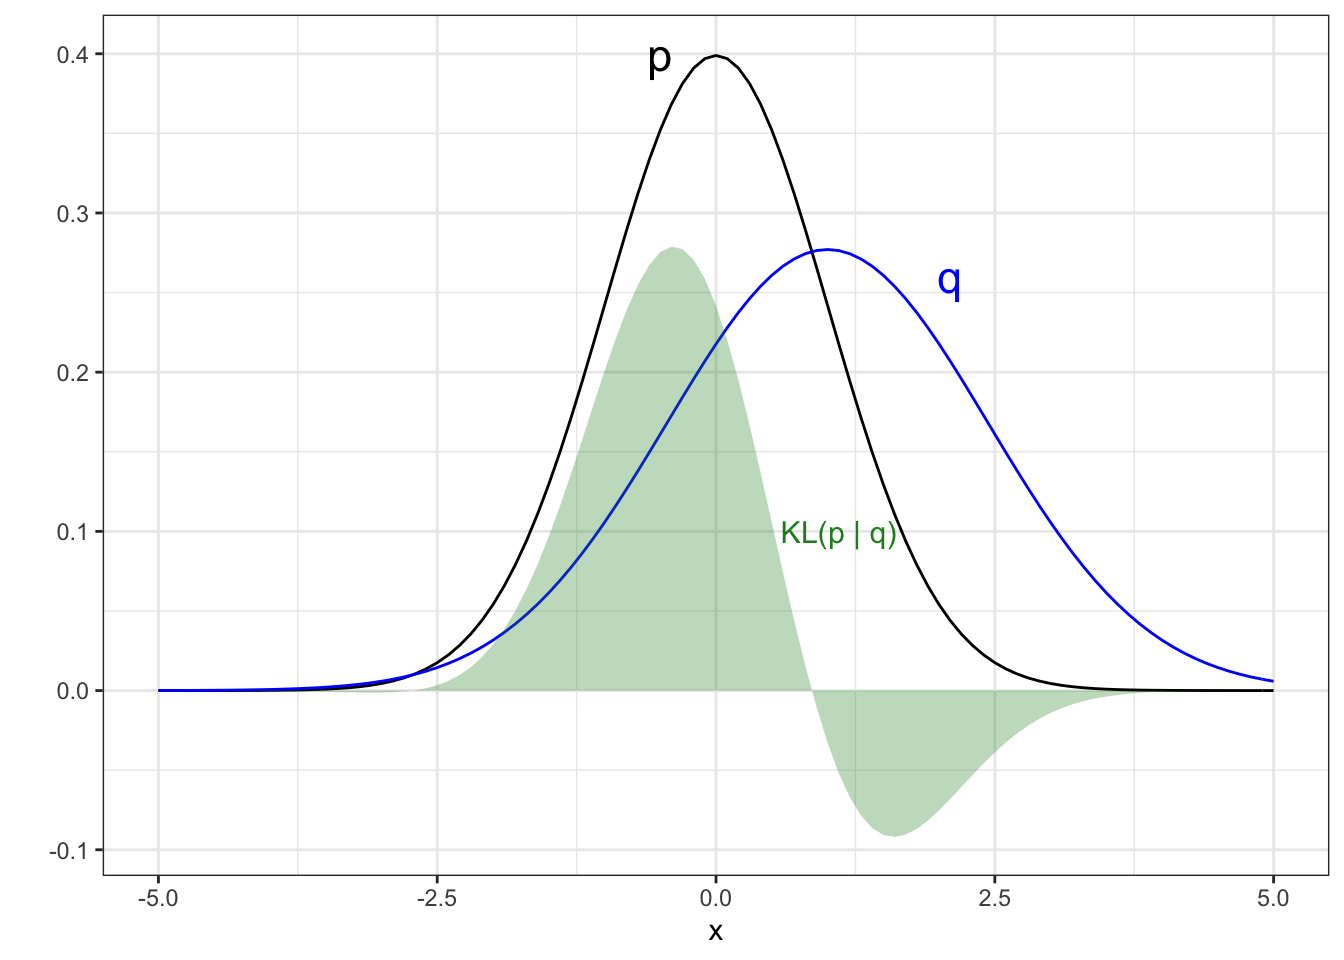 Example of the KL divergence between two Gaussian distributions. The contribution to the KL divergence is shown by the green region, with the KL figure being the area of this region.